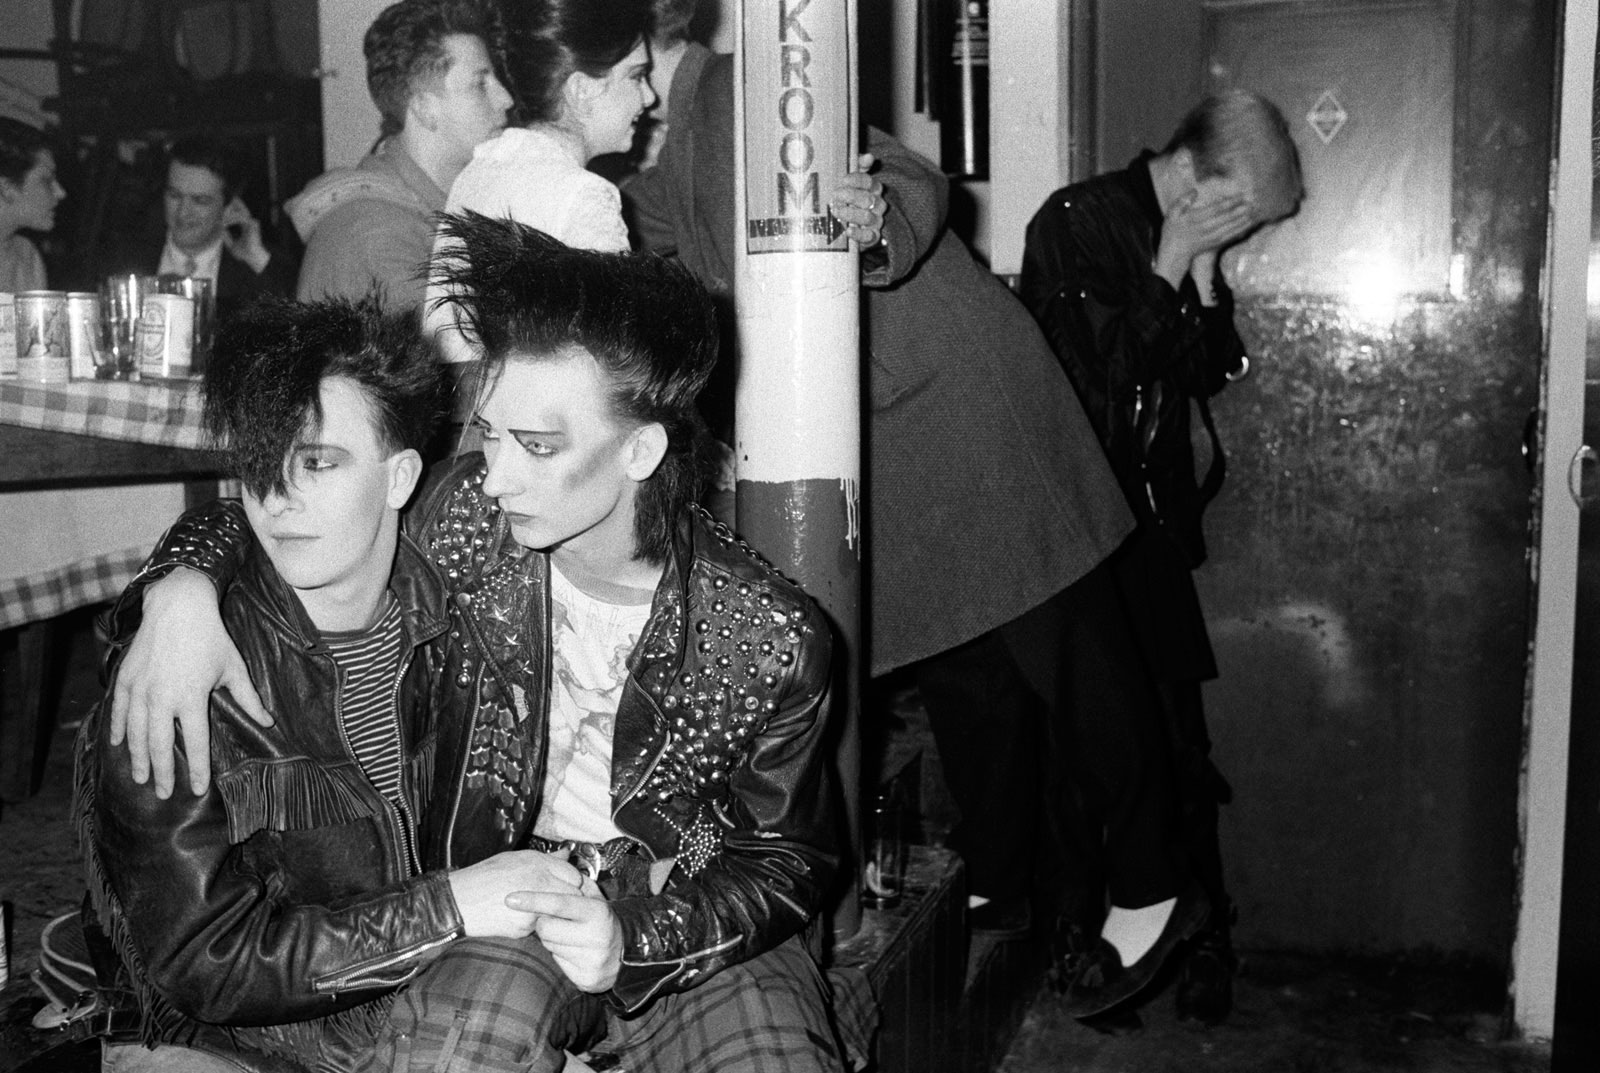 George O'Dowl as Boy George at the Blitz Club, Covent Garden, London, 1980